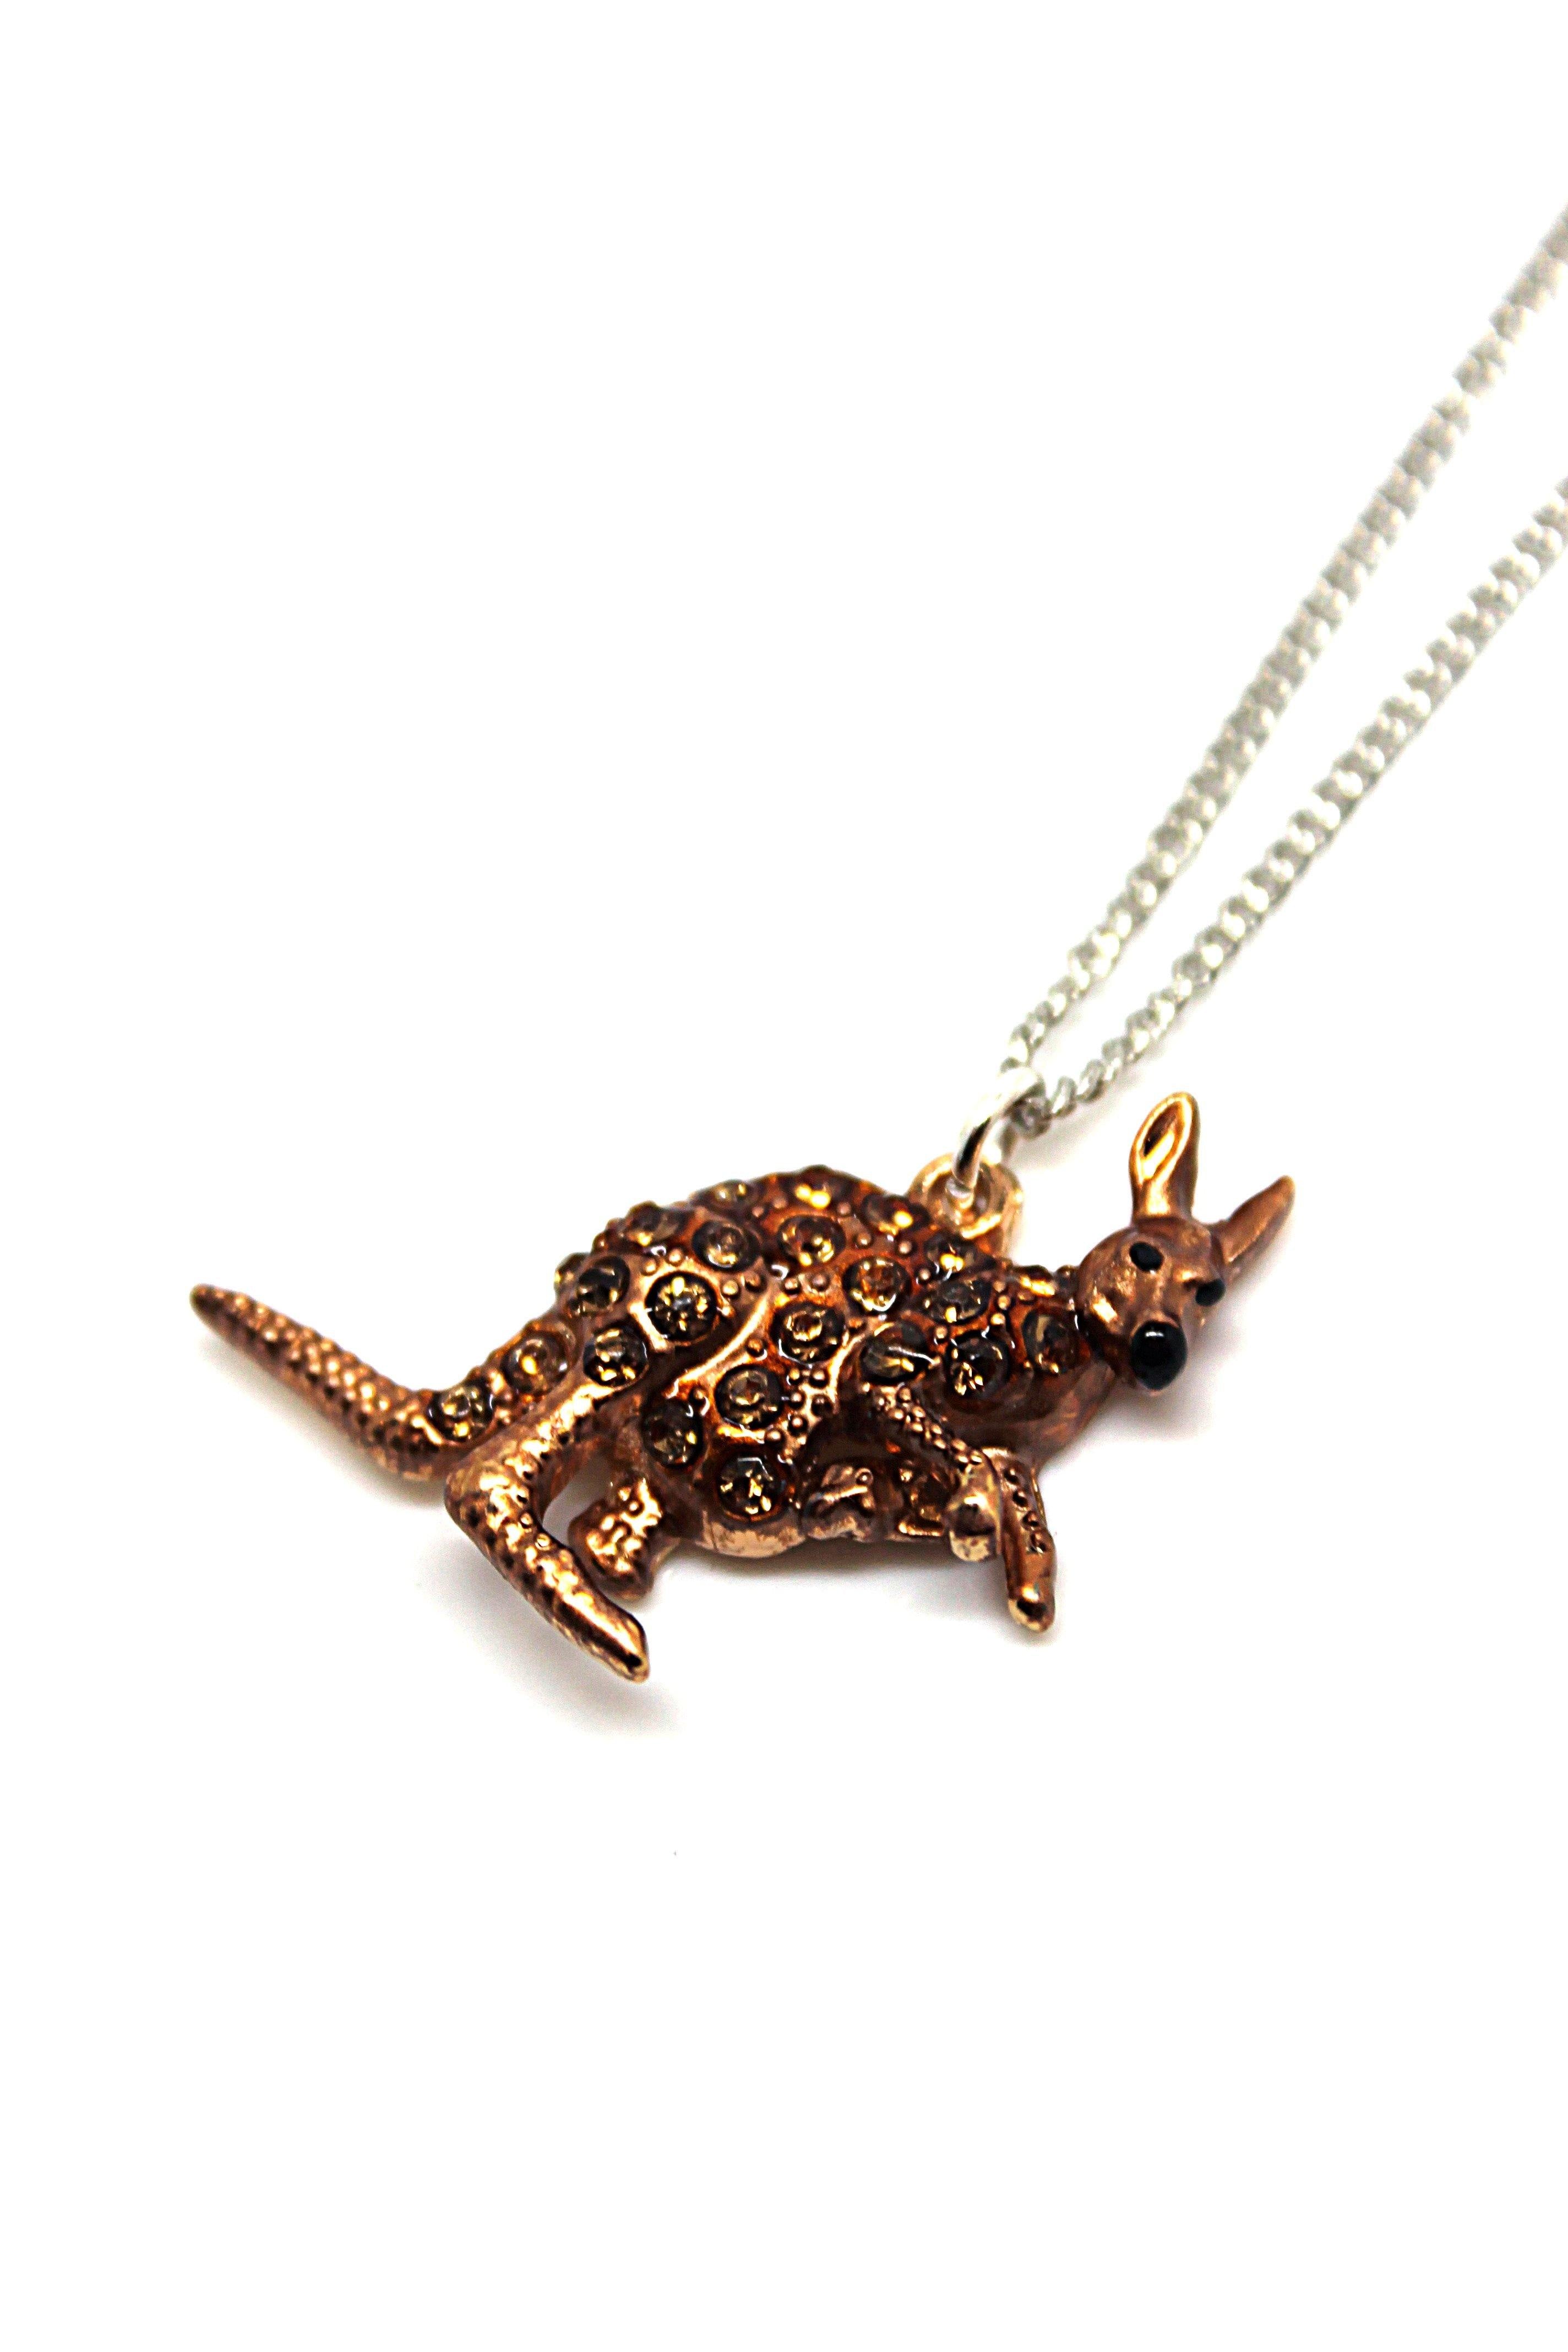 Kangaroo Necklace - Wildtouch - Wildtouch